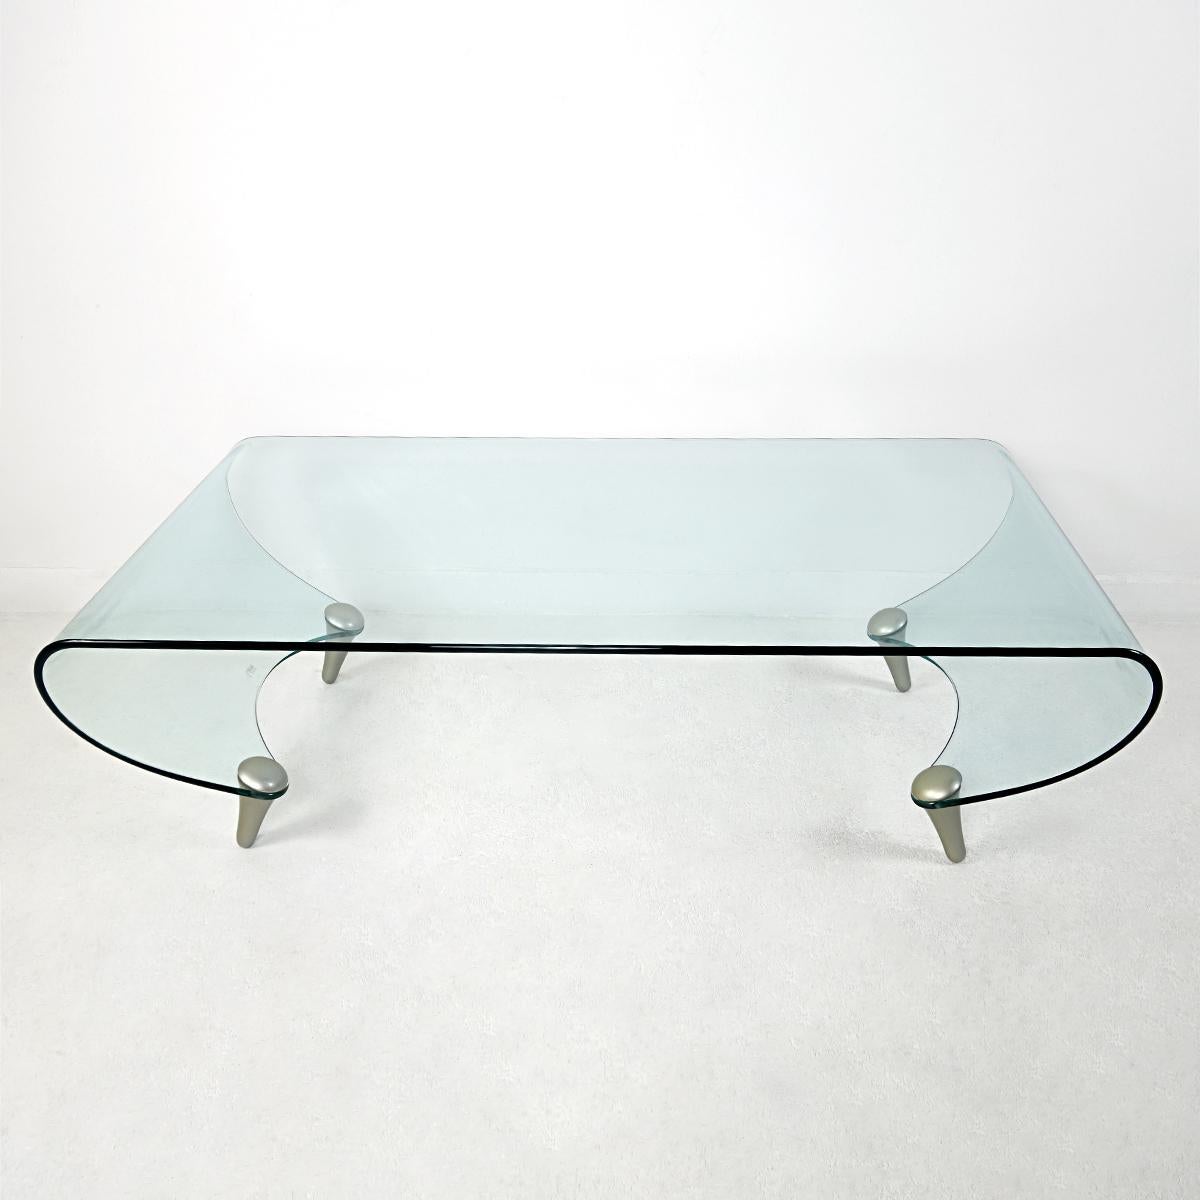 Rare coffee table tango was designed in 1996 by Fabio di Bartolomei for Italian glass specialist Fiam Italia. The table has a glass top surface combined with four silver colored wooden legs.
No longer in production. Signed in the glass: AB IH. Very